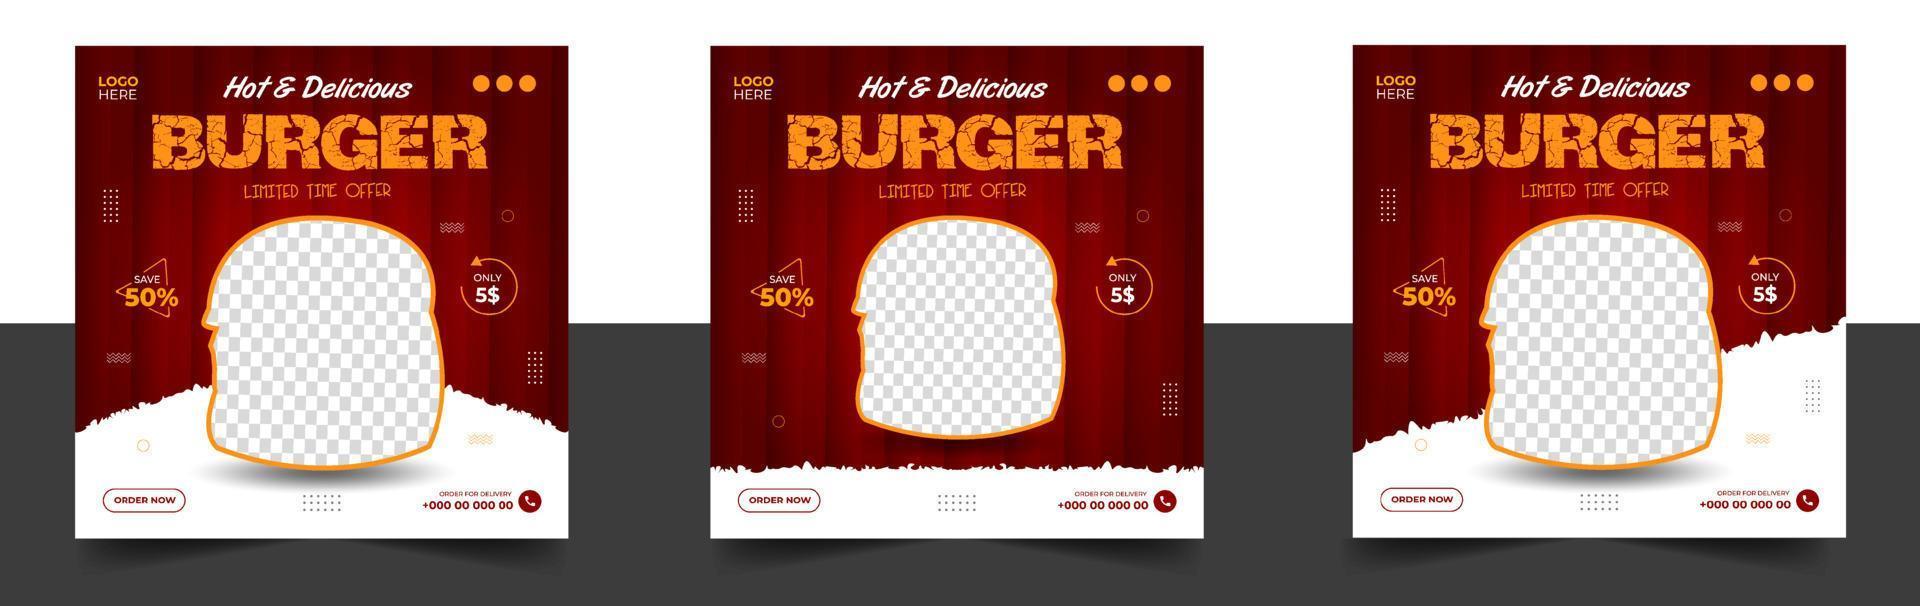 burger social media post banner design template. burger social banner, burger banner design, Fast food social media template for restaurant. burger social media banner with yellow and red color. vector